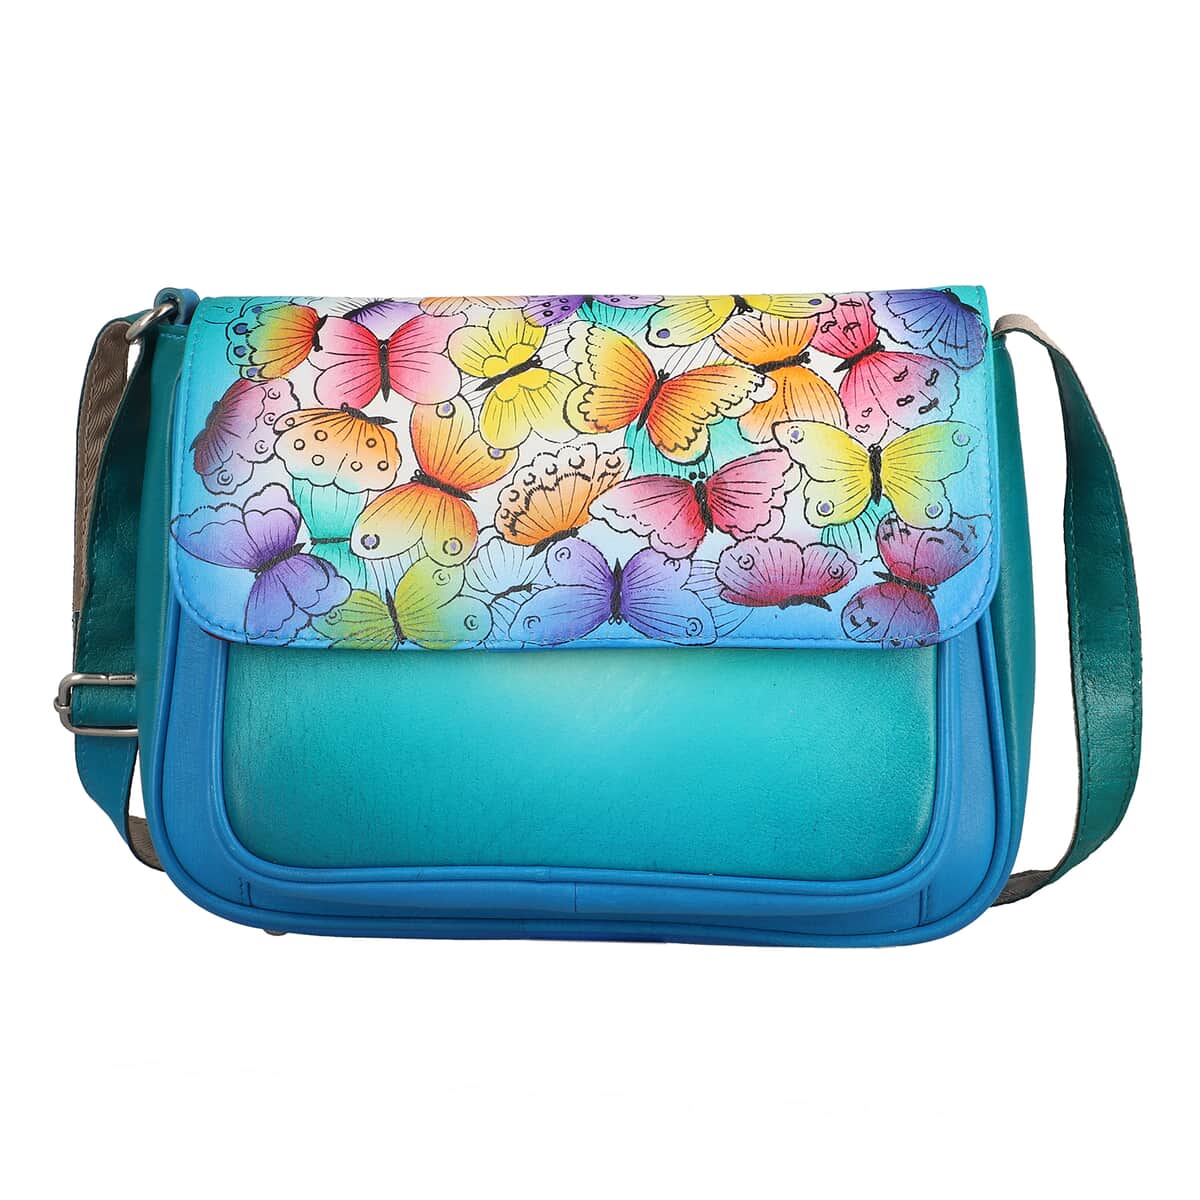 "SUKRITI 100% Genuine Leather Crossbody Bag Theme: Butterfly Color: Blue Size: 10 x 3 x 7 inches" image number 0